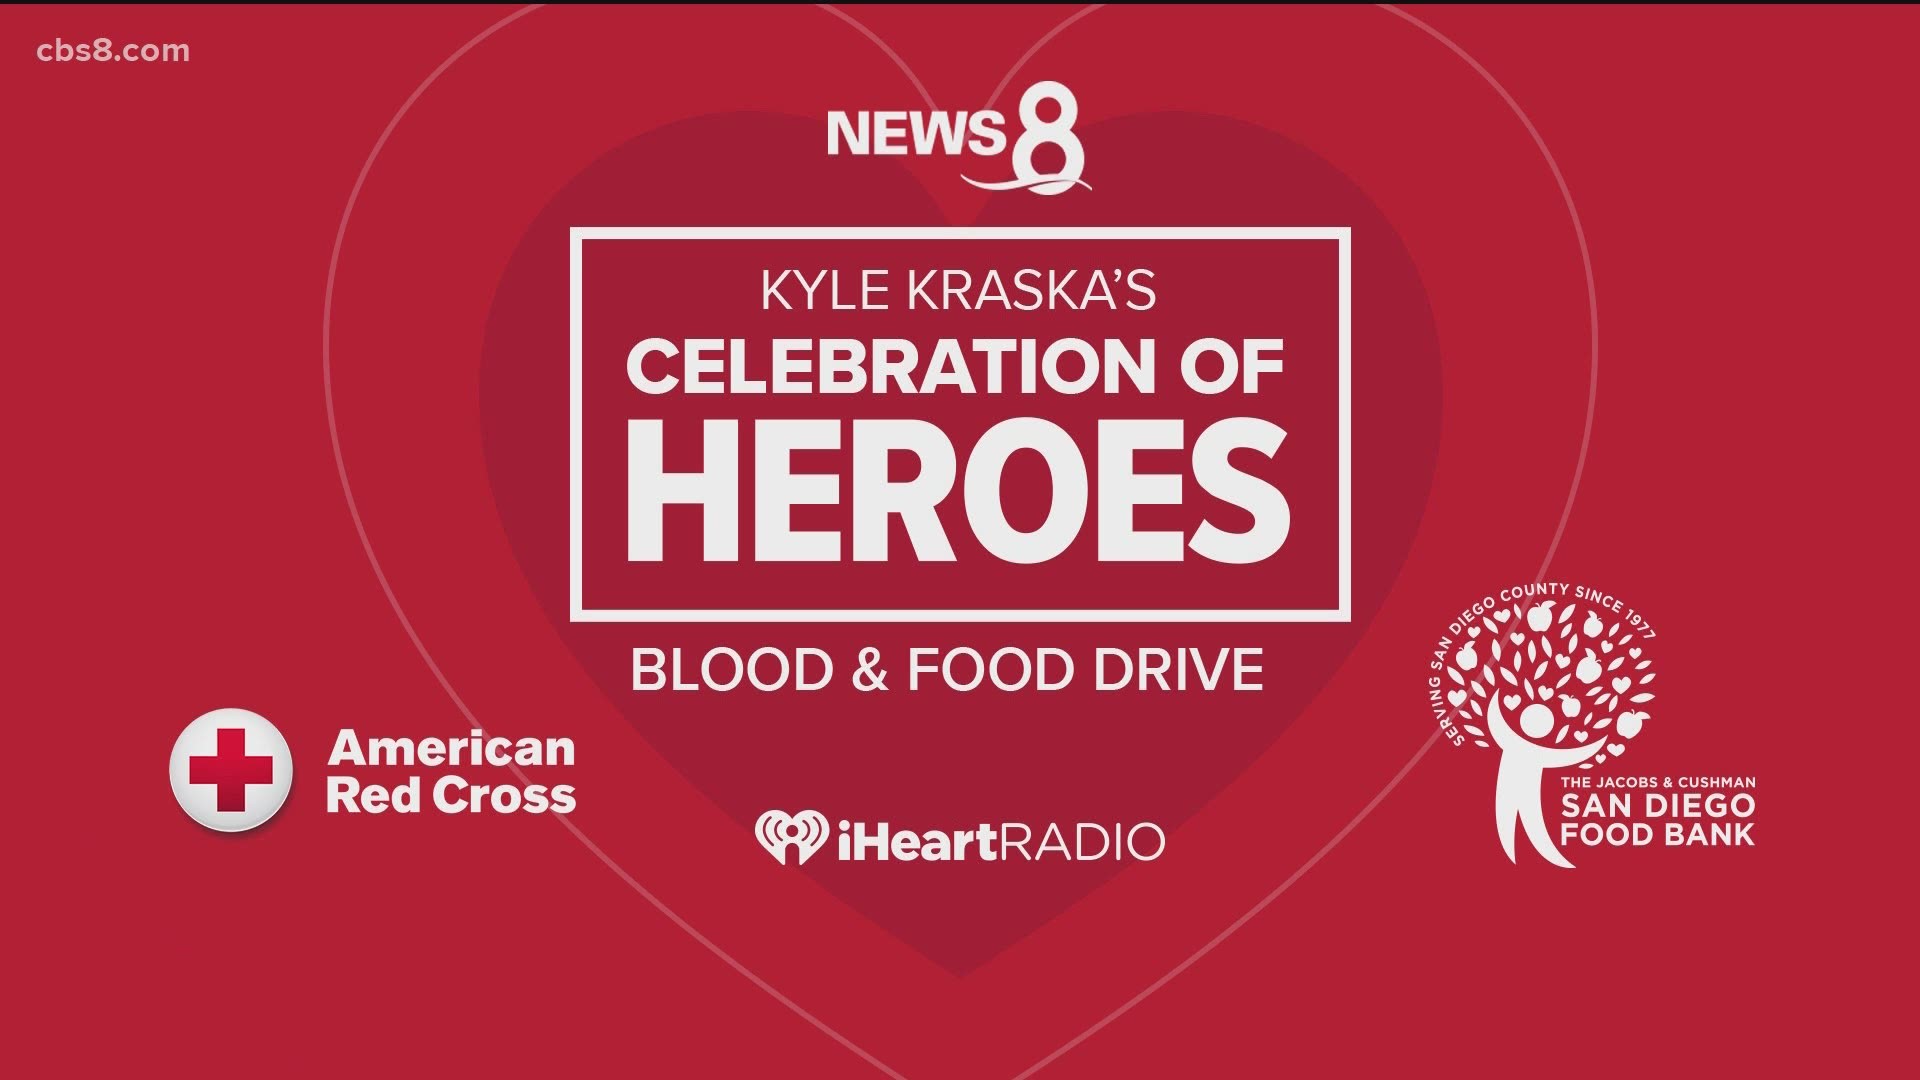 Join Kyle Kraska and News 8 for our day of giving to support The American Red Cross and Jacobs & Cushman San Diego Food Bank.